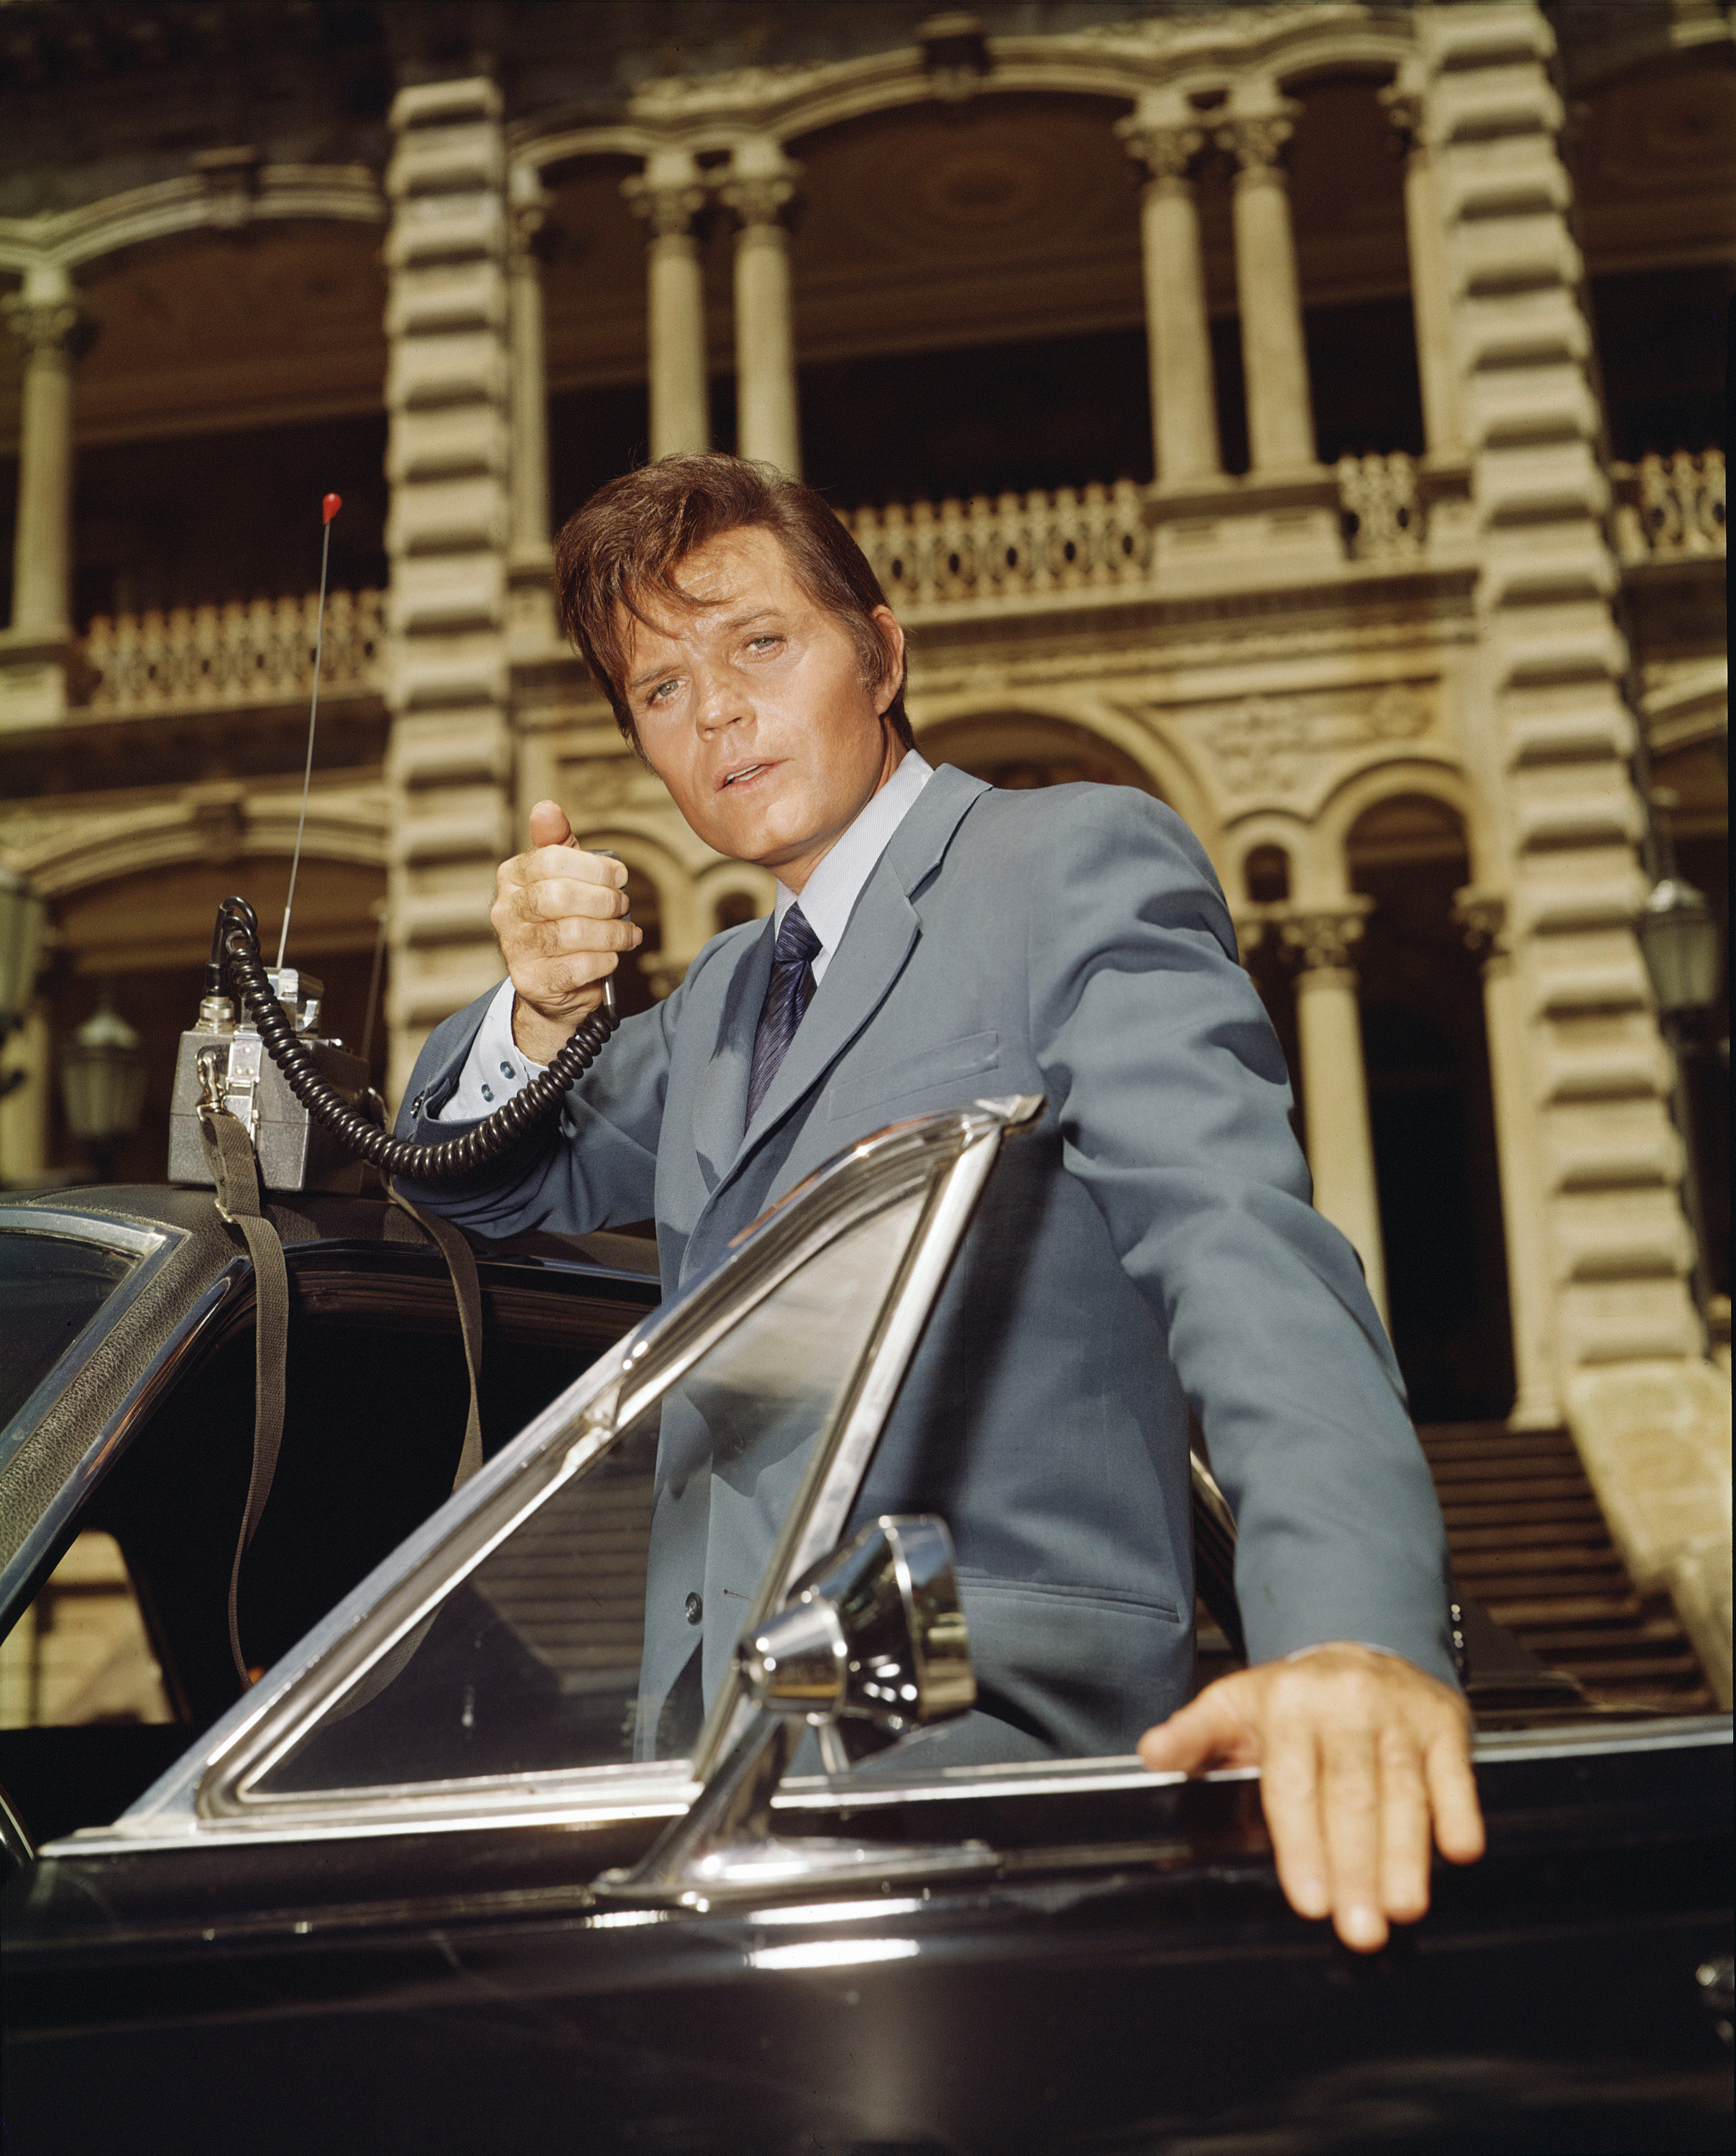 Jack Lord in a promotional still for "Hawaii Five-O" circa the 1970s. | Source: Getty Images